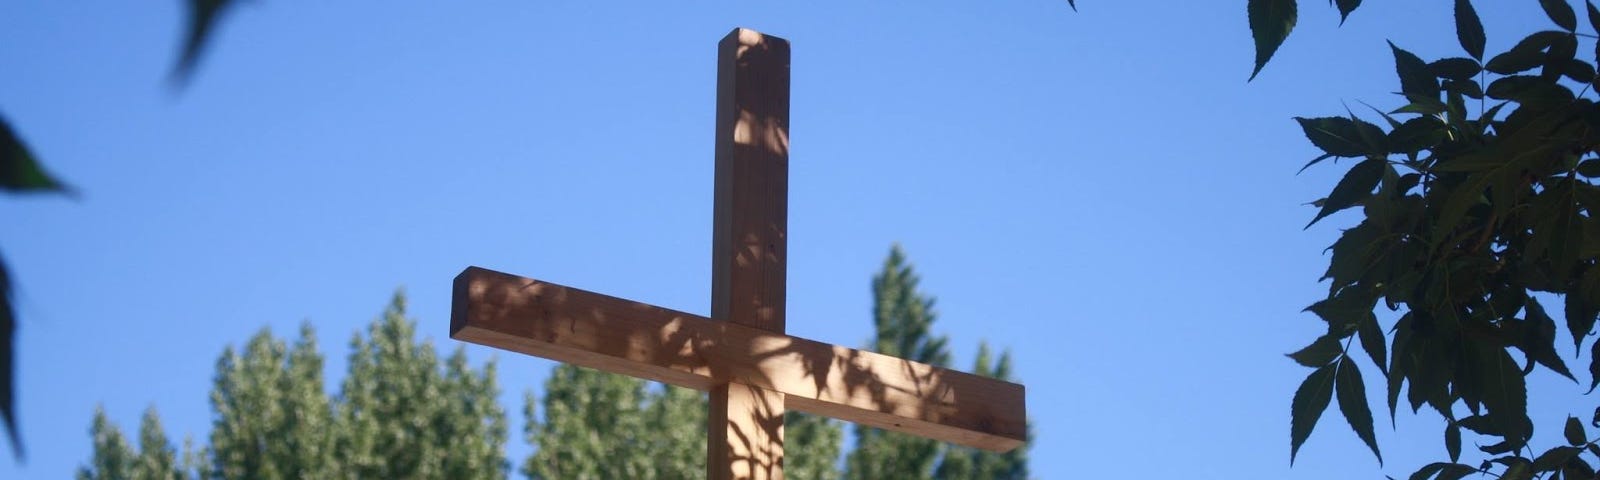 A wooden cross with a green tree in the background and leaves around the edges of the picture all against a blue sky and light filtering through the branches onto the cross.